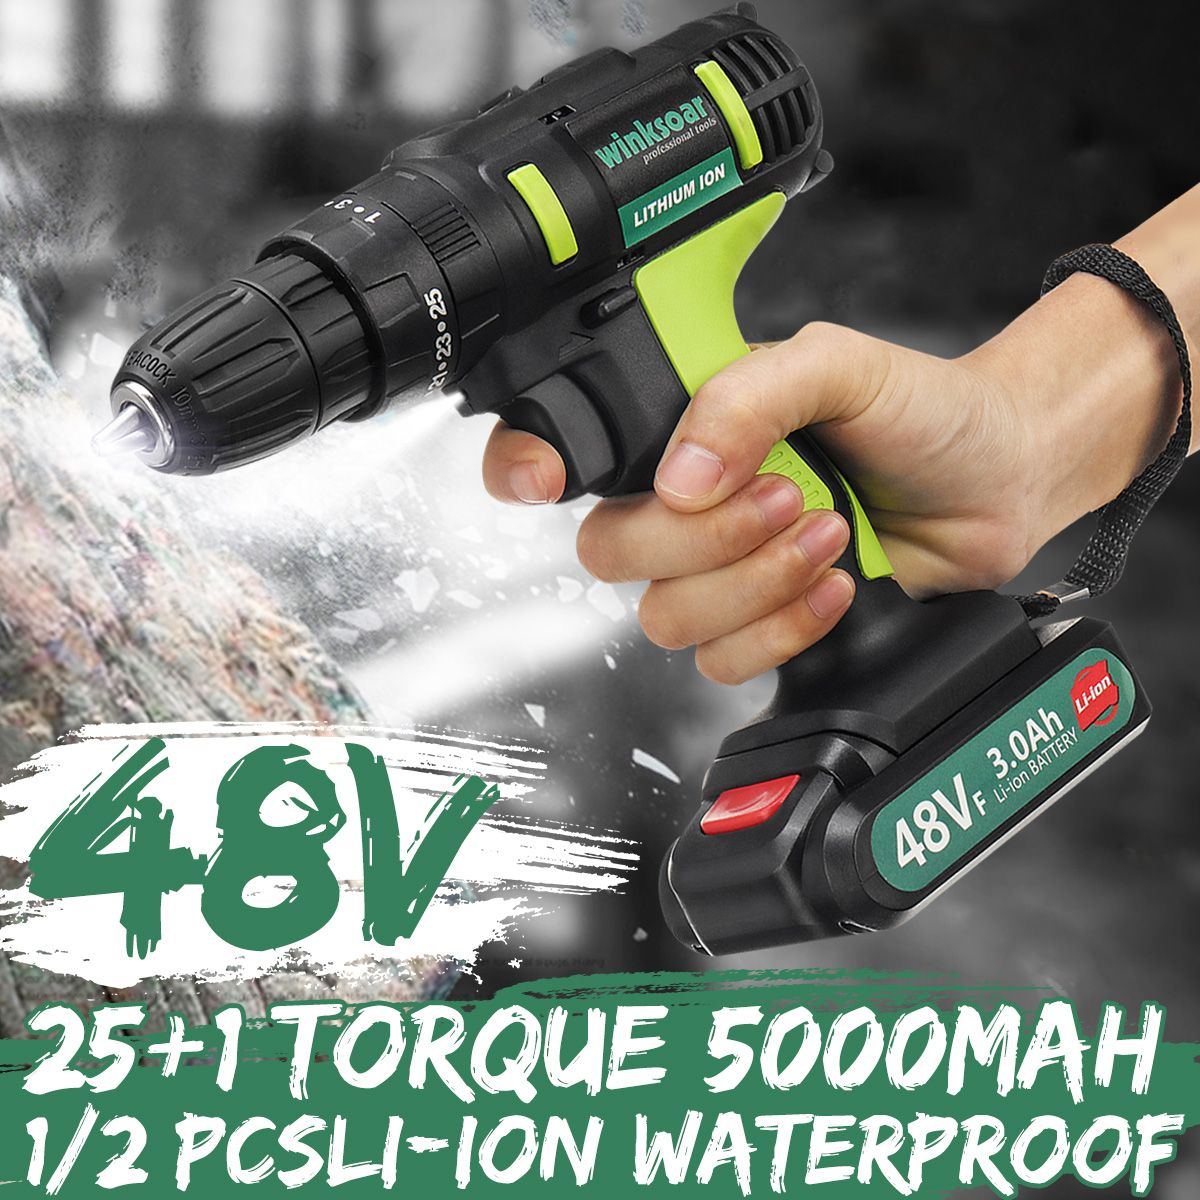 48VF-3-in-1-251-Gears-Electric-Impact-Drill-2-Speeds-Rechargeable-Screwdriver-W-LED-Light-1733392